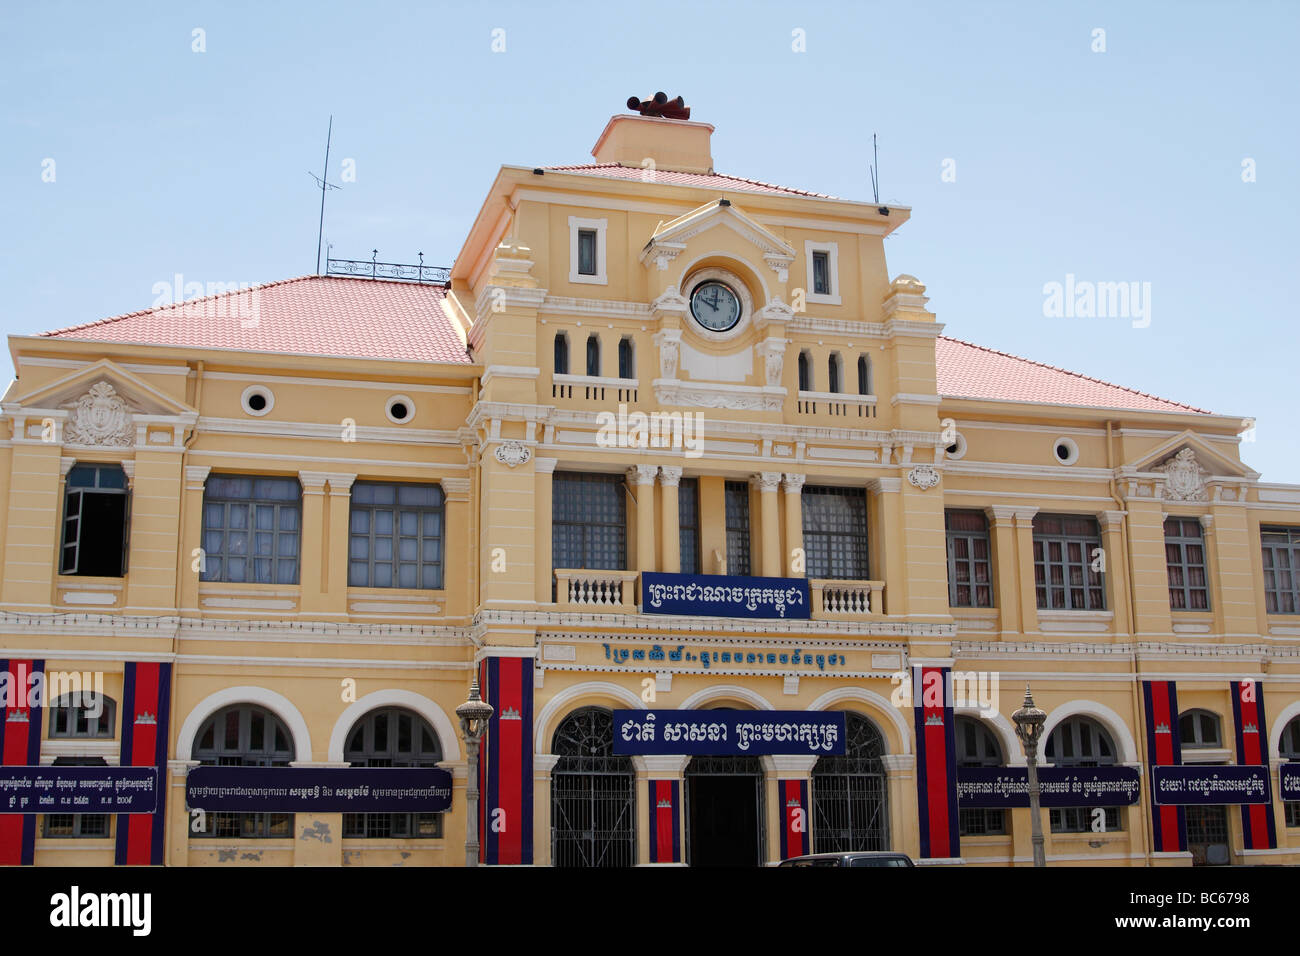 'Phnom Penh' 'Post Office', Cambodia, restored [French colonial] building architecture Stock Photo